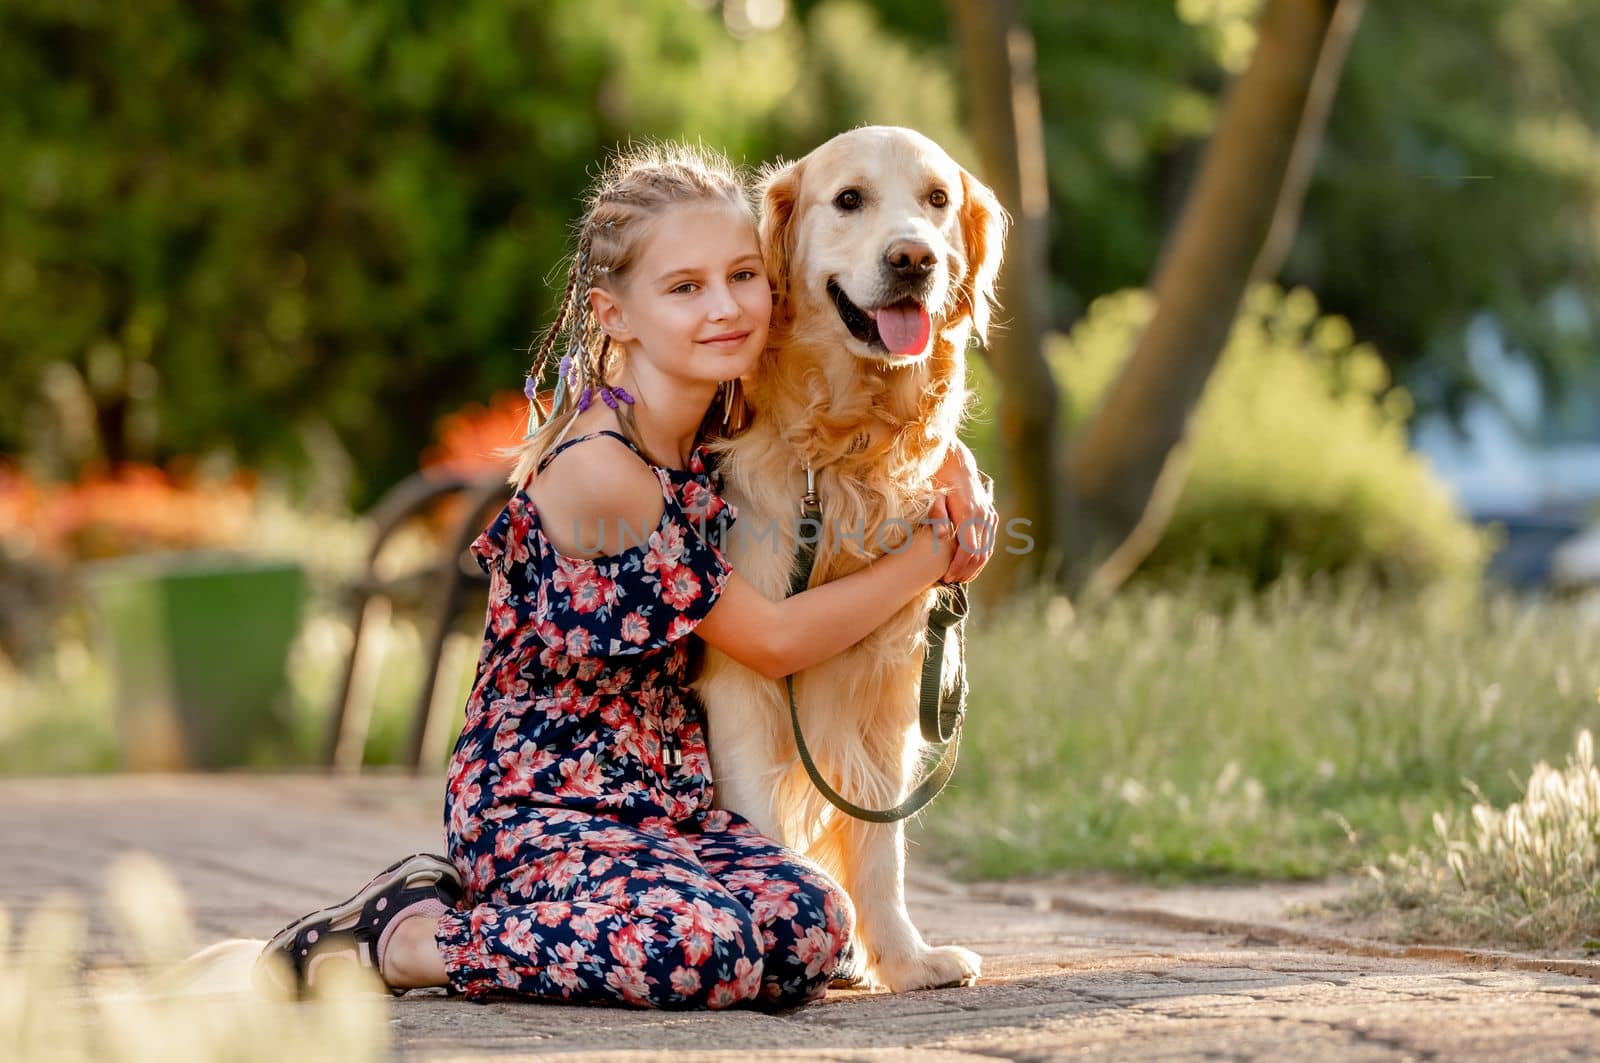 Preteen girl and her golden retriever dog on lace looking at camera. Female child kid with a purebred labrador doggy pet